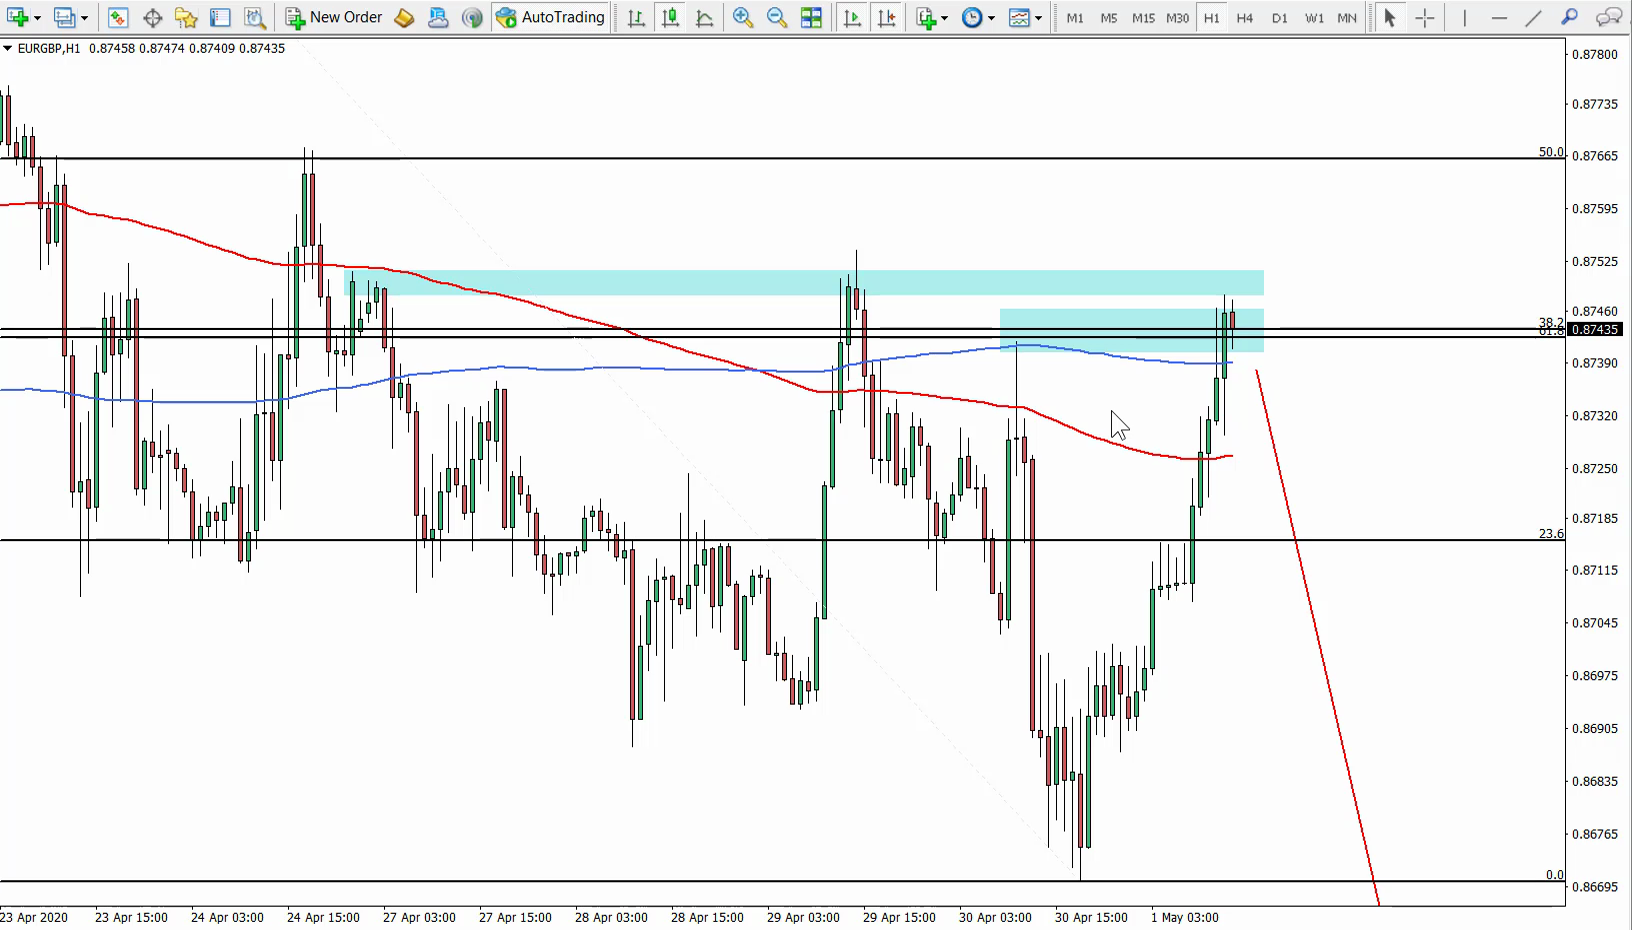 EUR/GBP Sell Trade Idea - May 1st 2020 - ForexBoat Trading ...